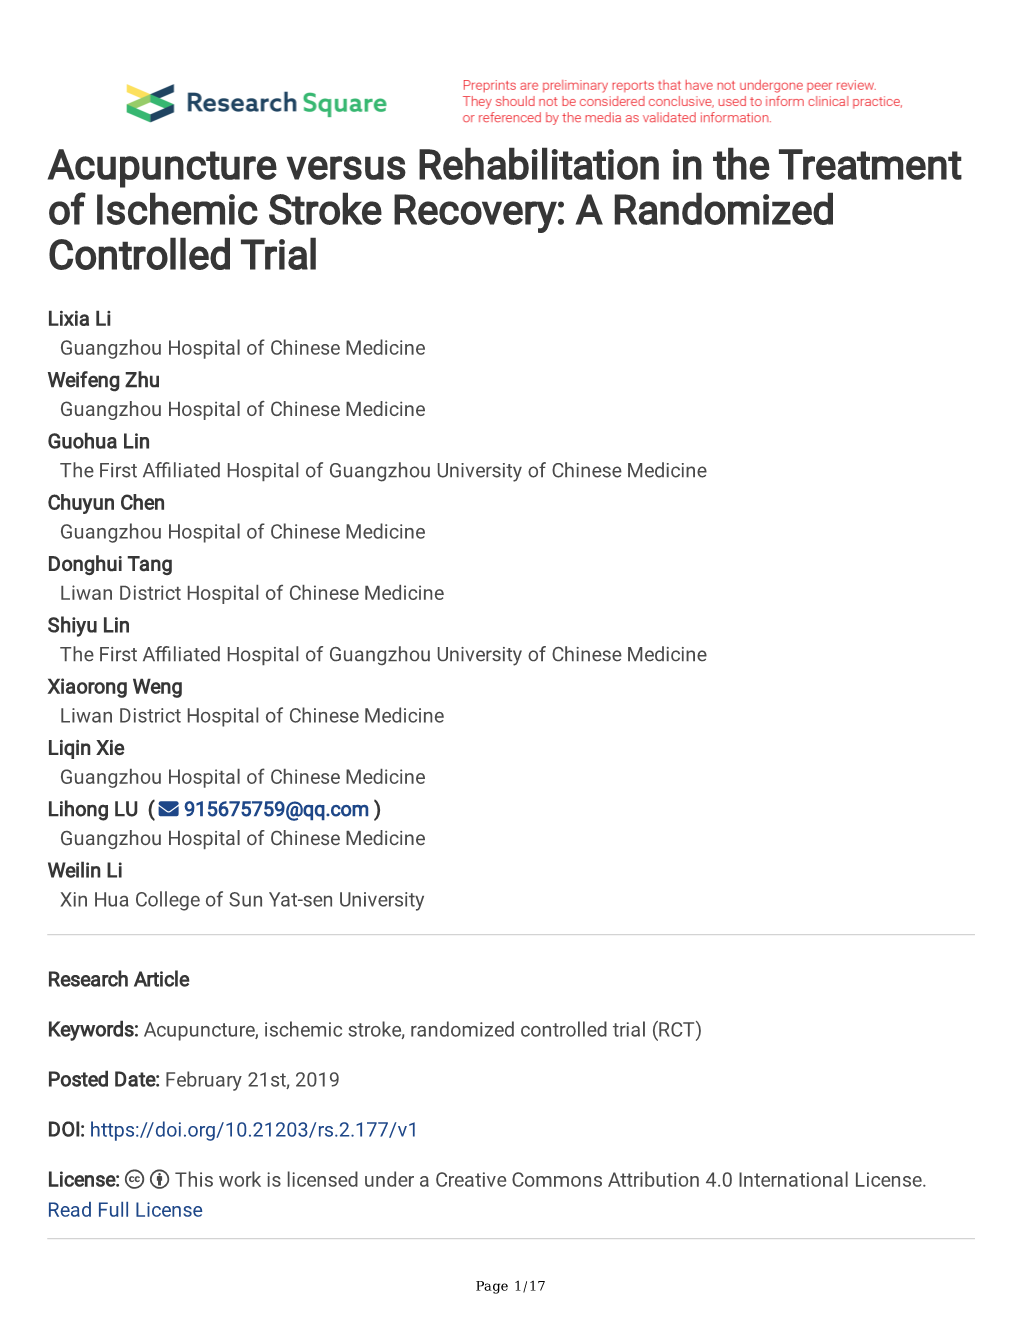 Acupuncture Versus Rehabilitation in the Treatment of Ischemic Stroke Recovery: a Randomized Controlled Trial